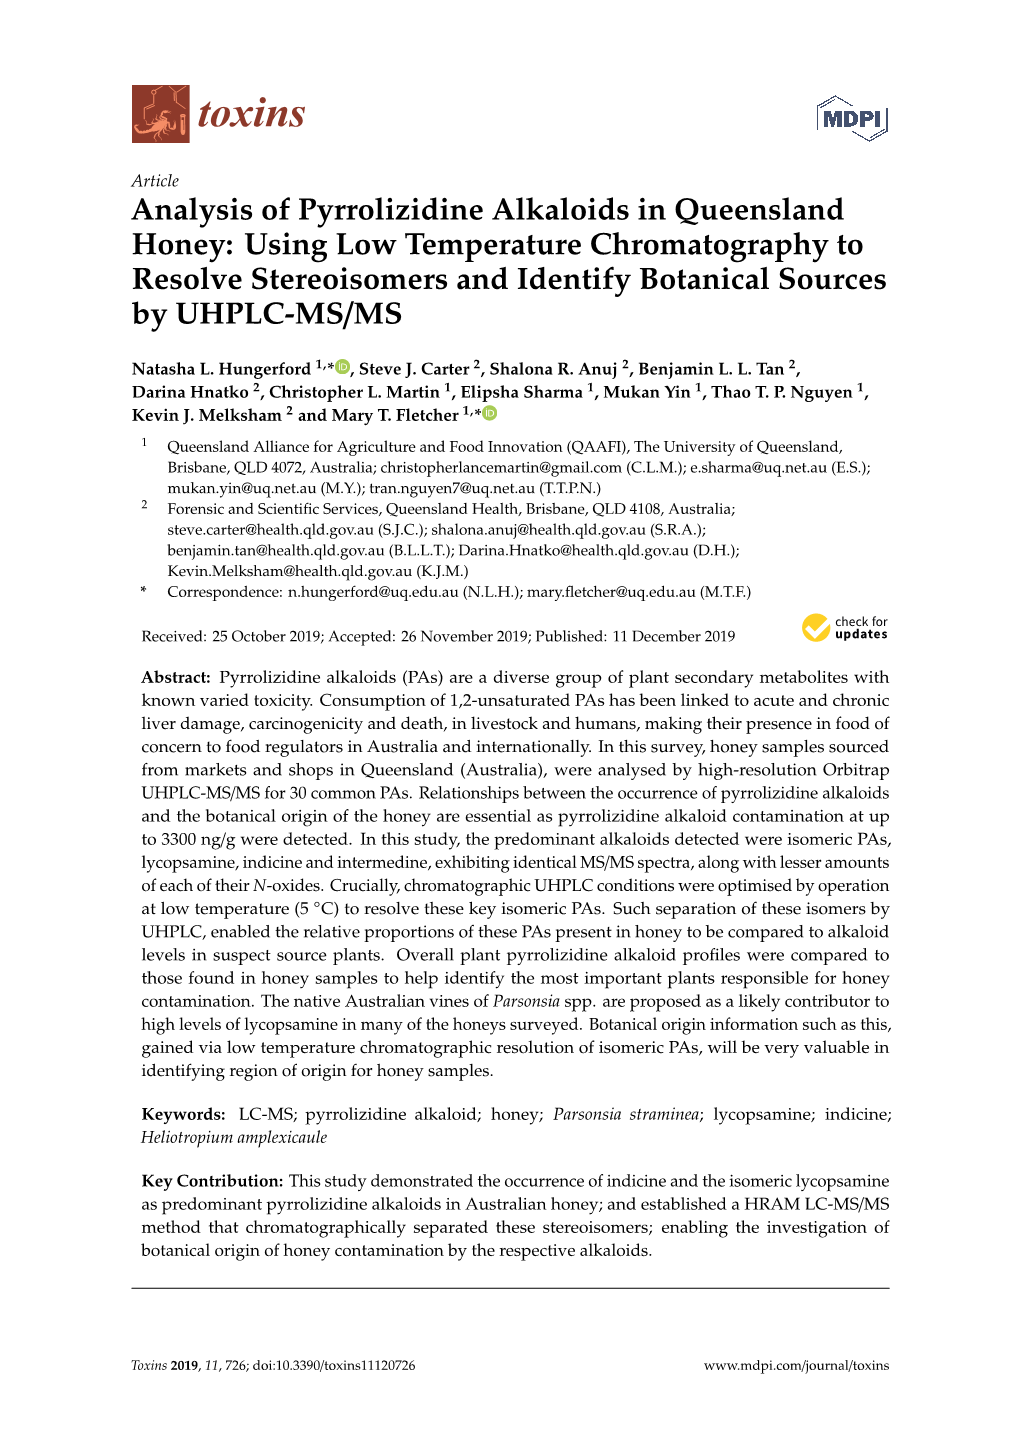 Analysis of Pyrrolizidine Alkaloids in Queensland Honey: Using Low Temperature Chromatography to Resolve Stereoisomers and Identify Botanical Sources by UHPLC-MS/MS